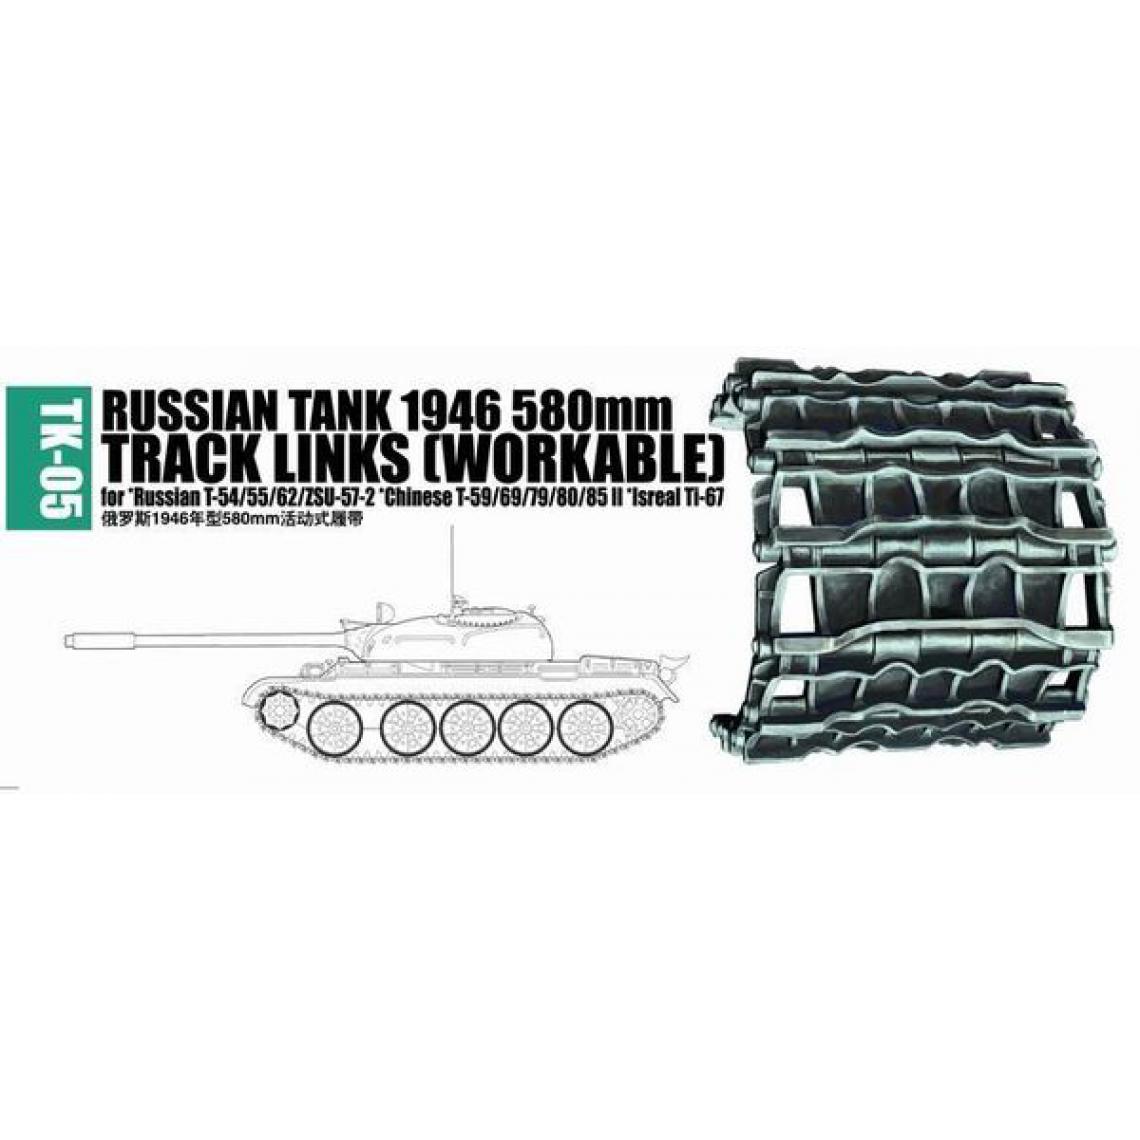 Trumpeter - Russian tank 1946 580mm for Russian T-54/55/62/ZSU-57-2, Chinese T-59/69/79/80/85II- Trumpeter - Accessoires et pièces